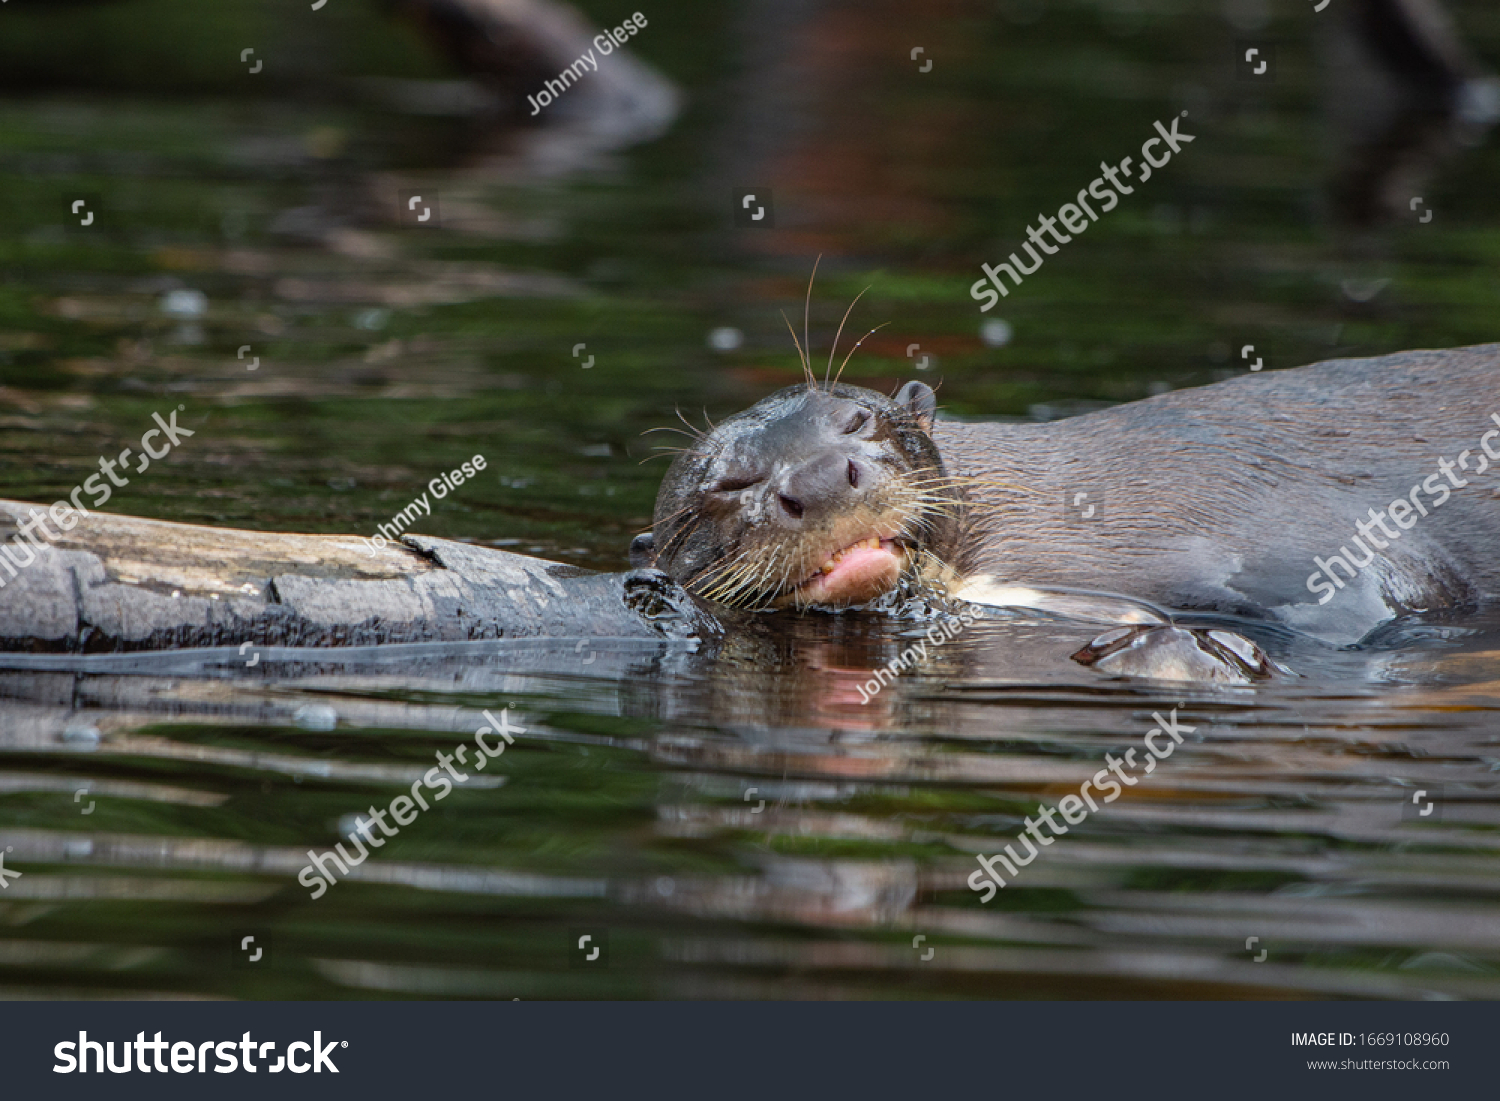 Giant River Otter Family Amazon Forest Stock Photo Edit Now